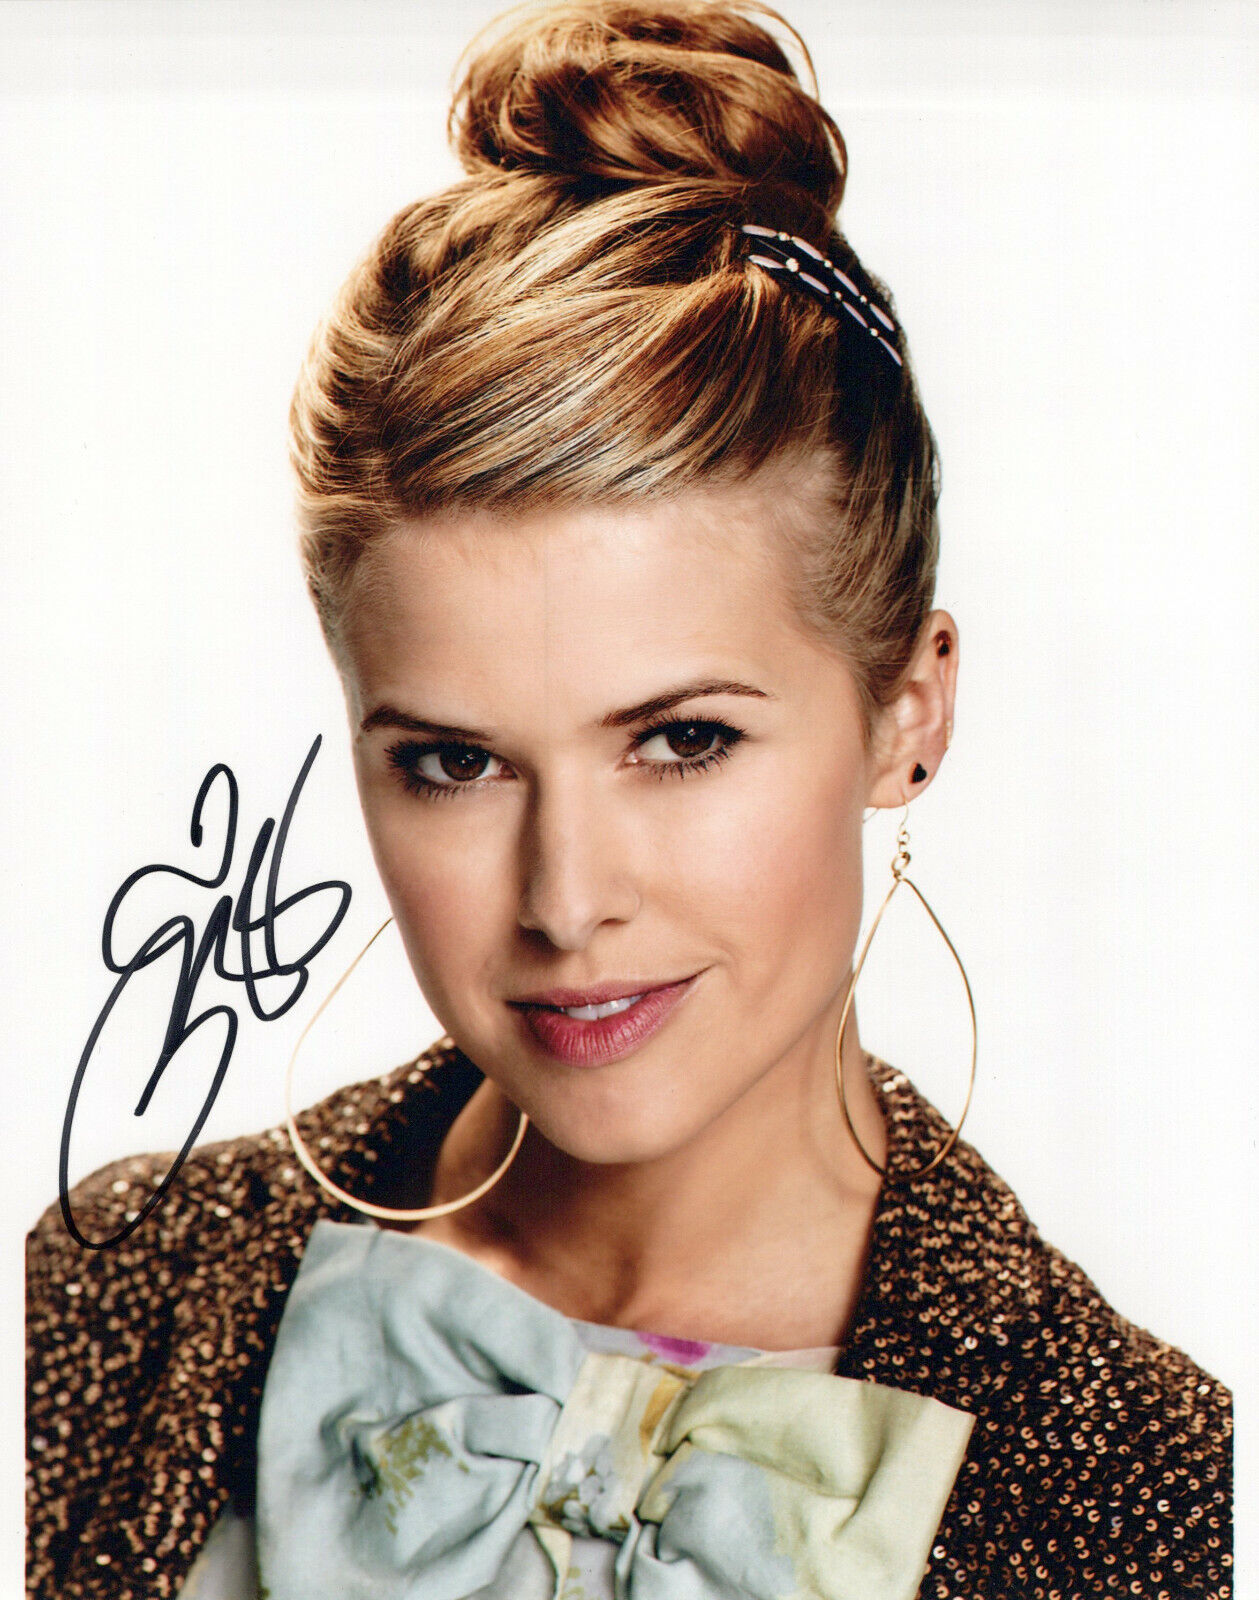 Sarah Wright glamour shot autographed Photo Poster painting signed 8x10 #3